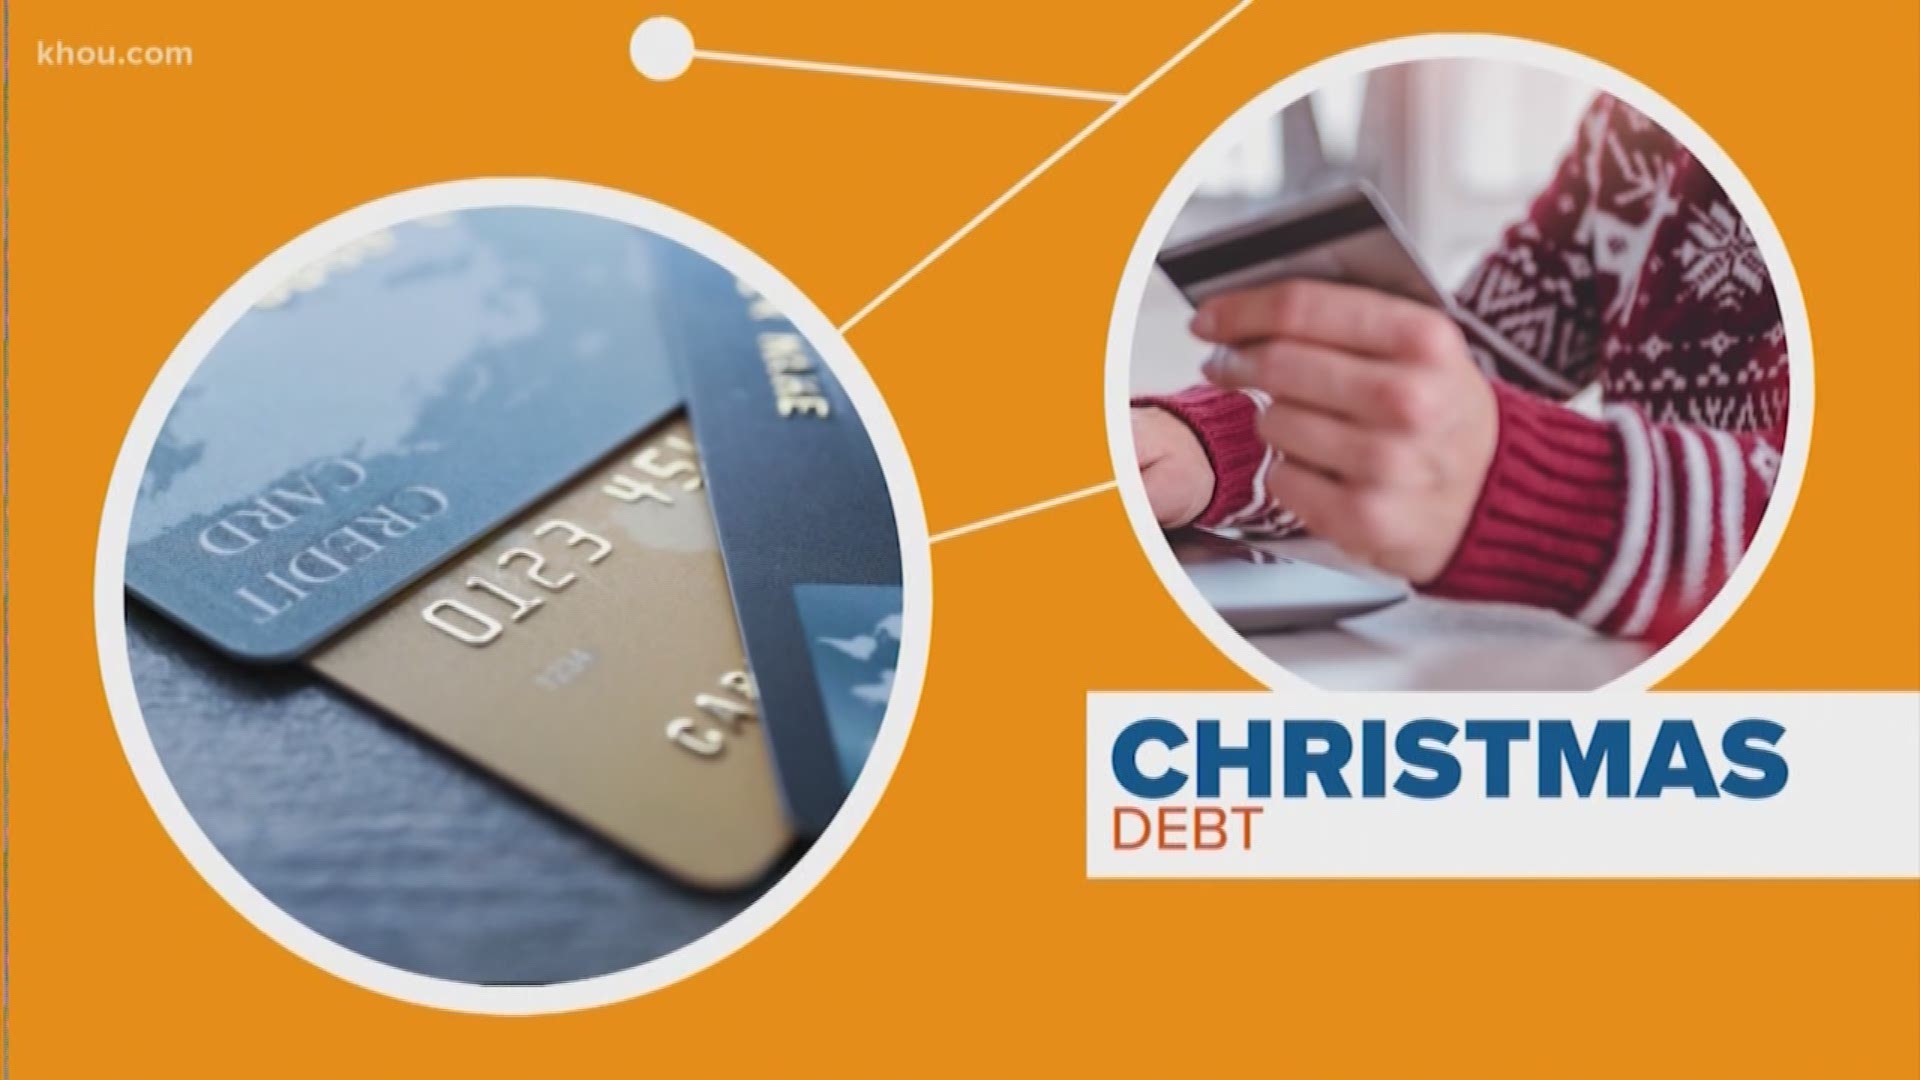 Christmas shopping means plenty of fun presents, but it can also mean a lot of debt! Our Ron Trevino connects the dots on how you can pay it off before it piles up.